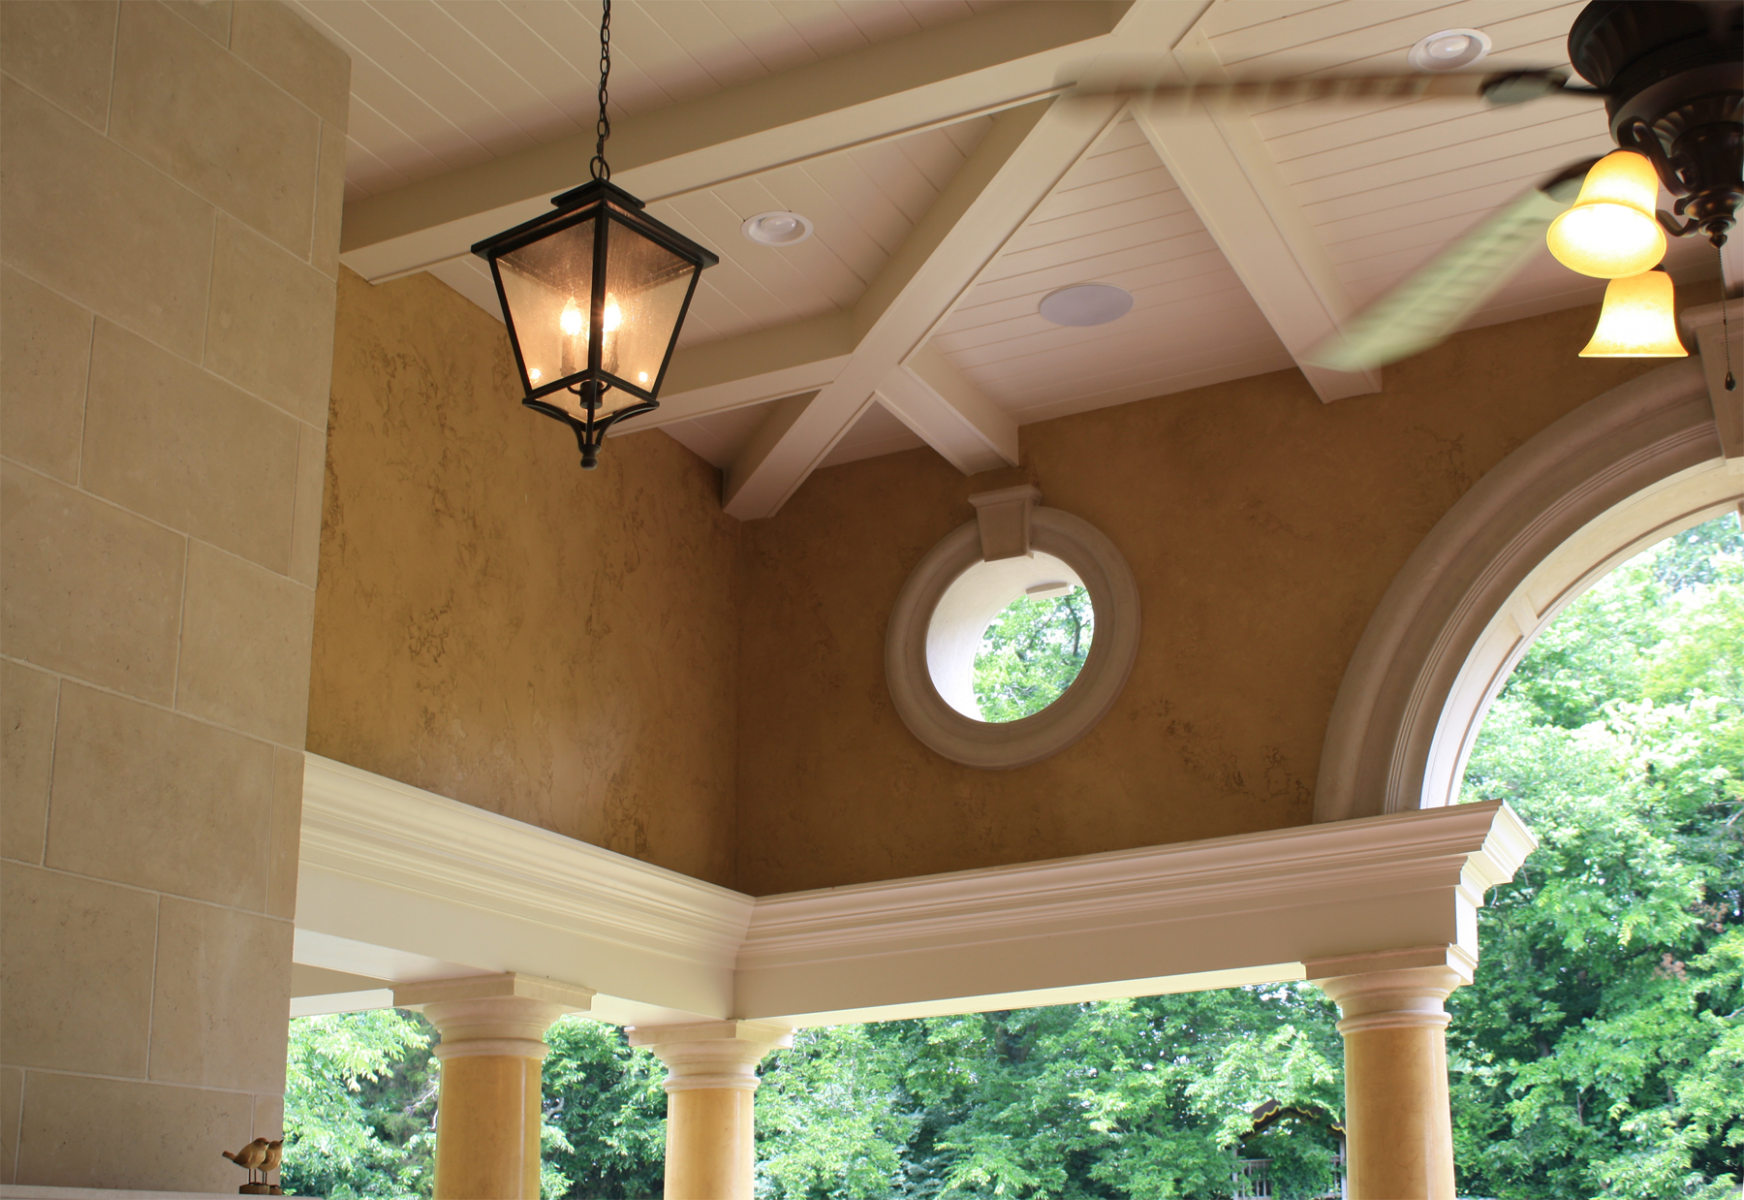 Custom designed loggia:  Venetian plaster columns with faux stone capitals and base and upper wall O’villa plaster finish.